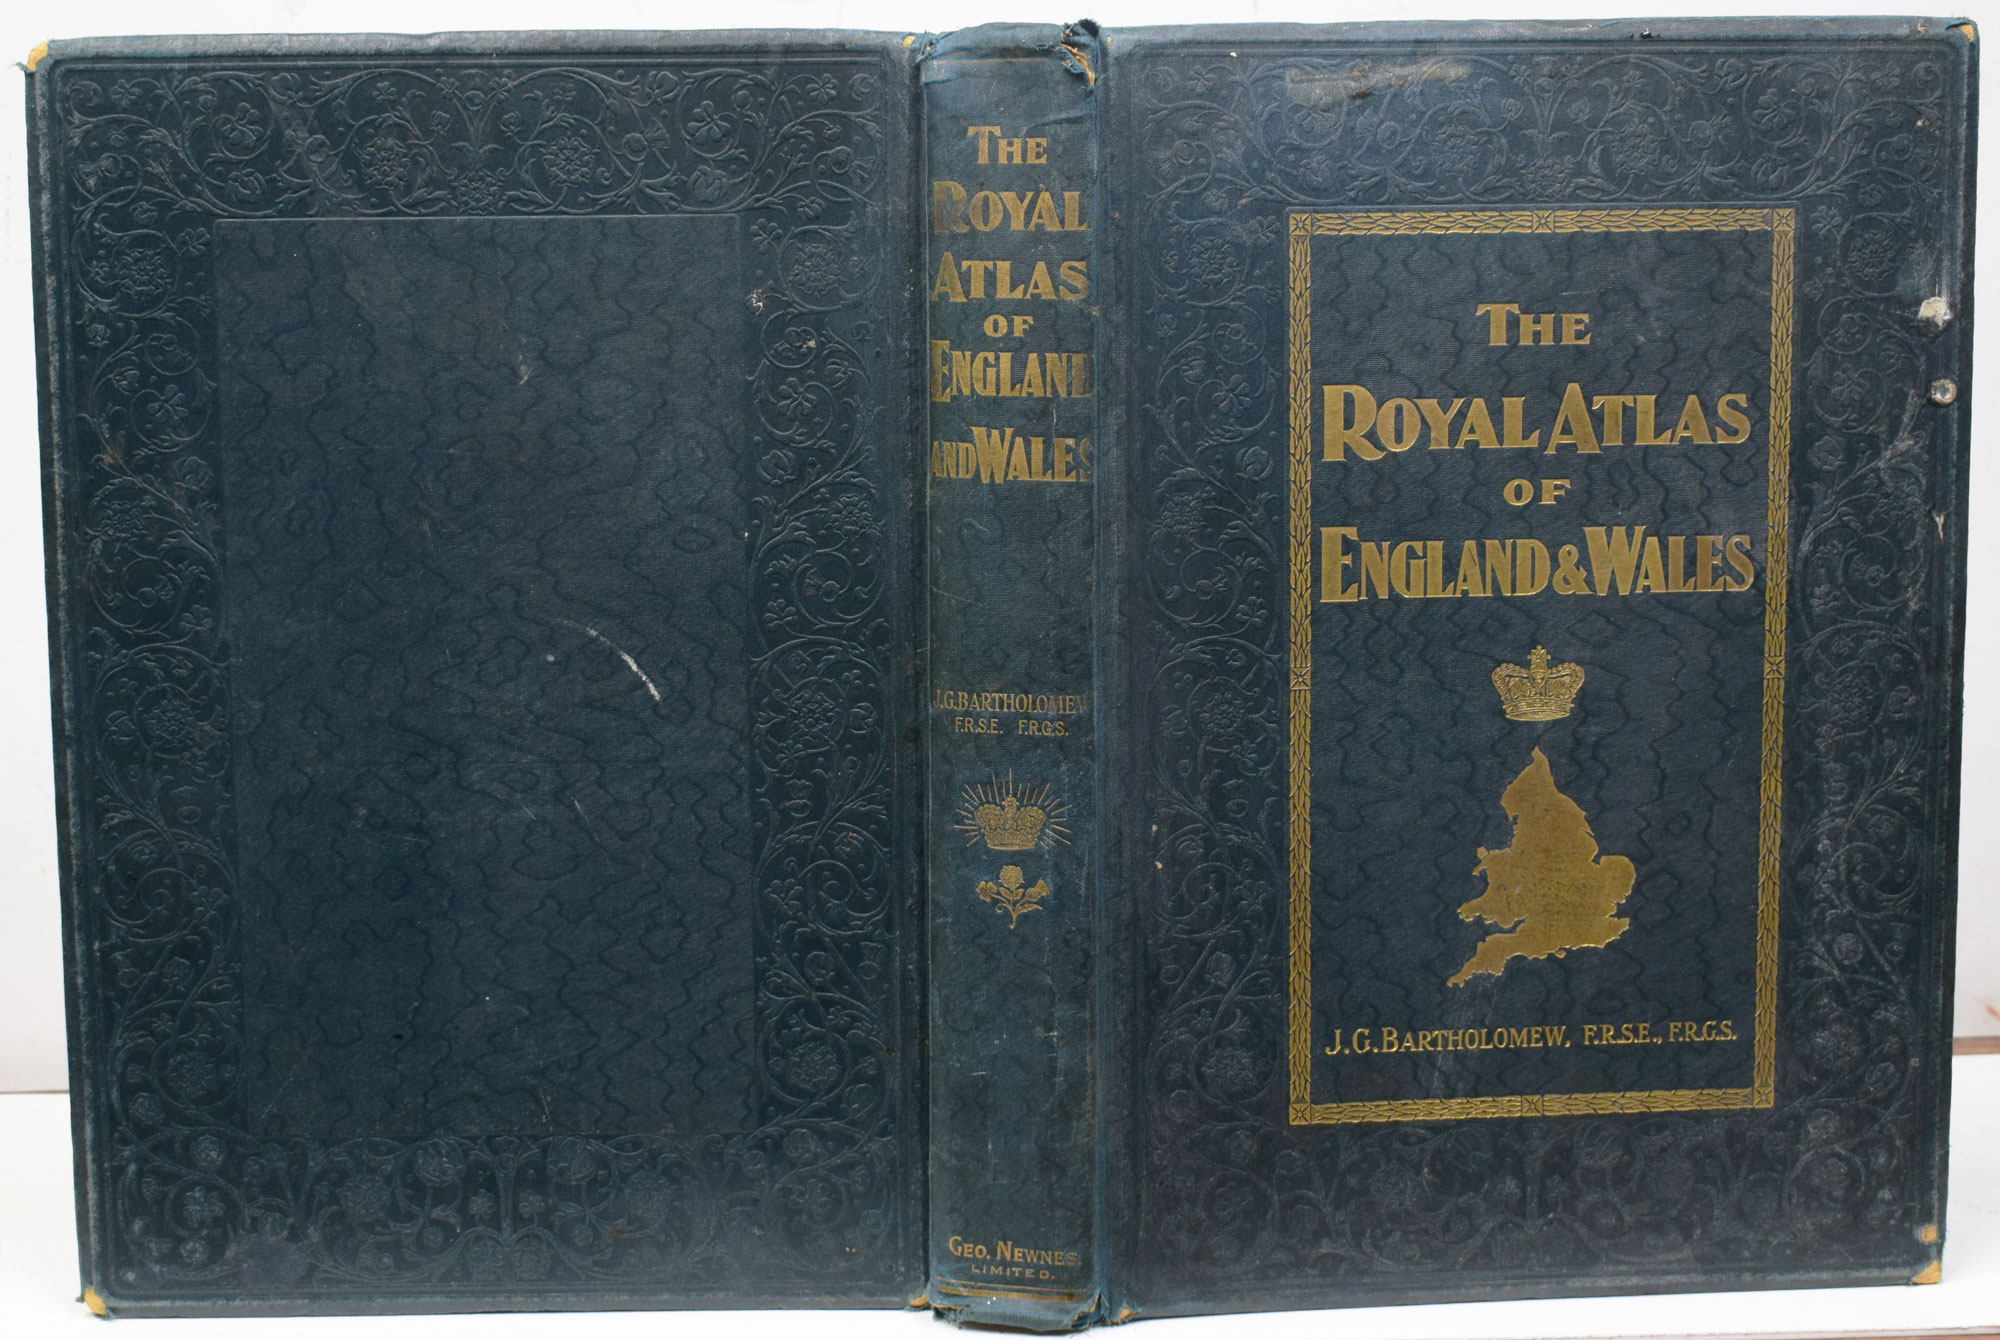 The Royal Atlas of England and Wales